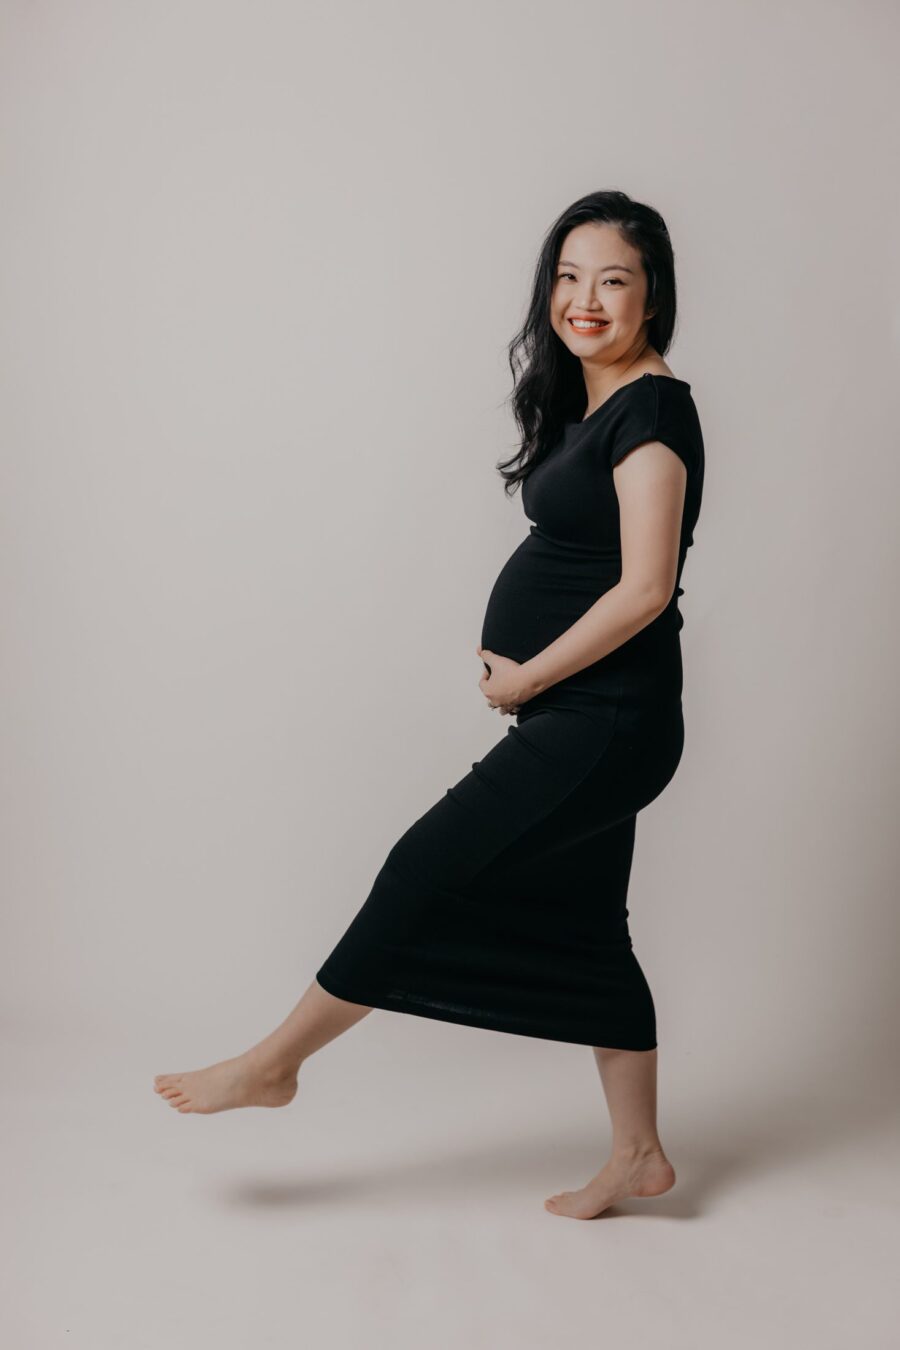 Mini Maternity Photo Session - Expectant mother and father posing in minimalist style against creamy beige backdrop at Darkroom Project Studio in Pinnacle Kelana Jaya, Kuala Lumpur.